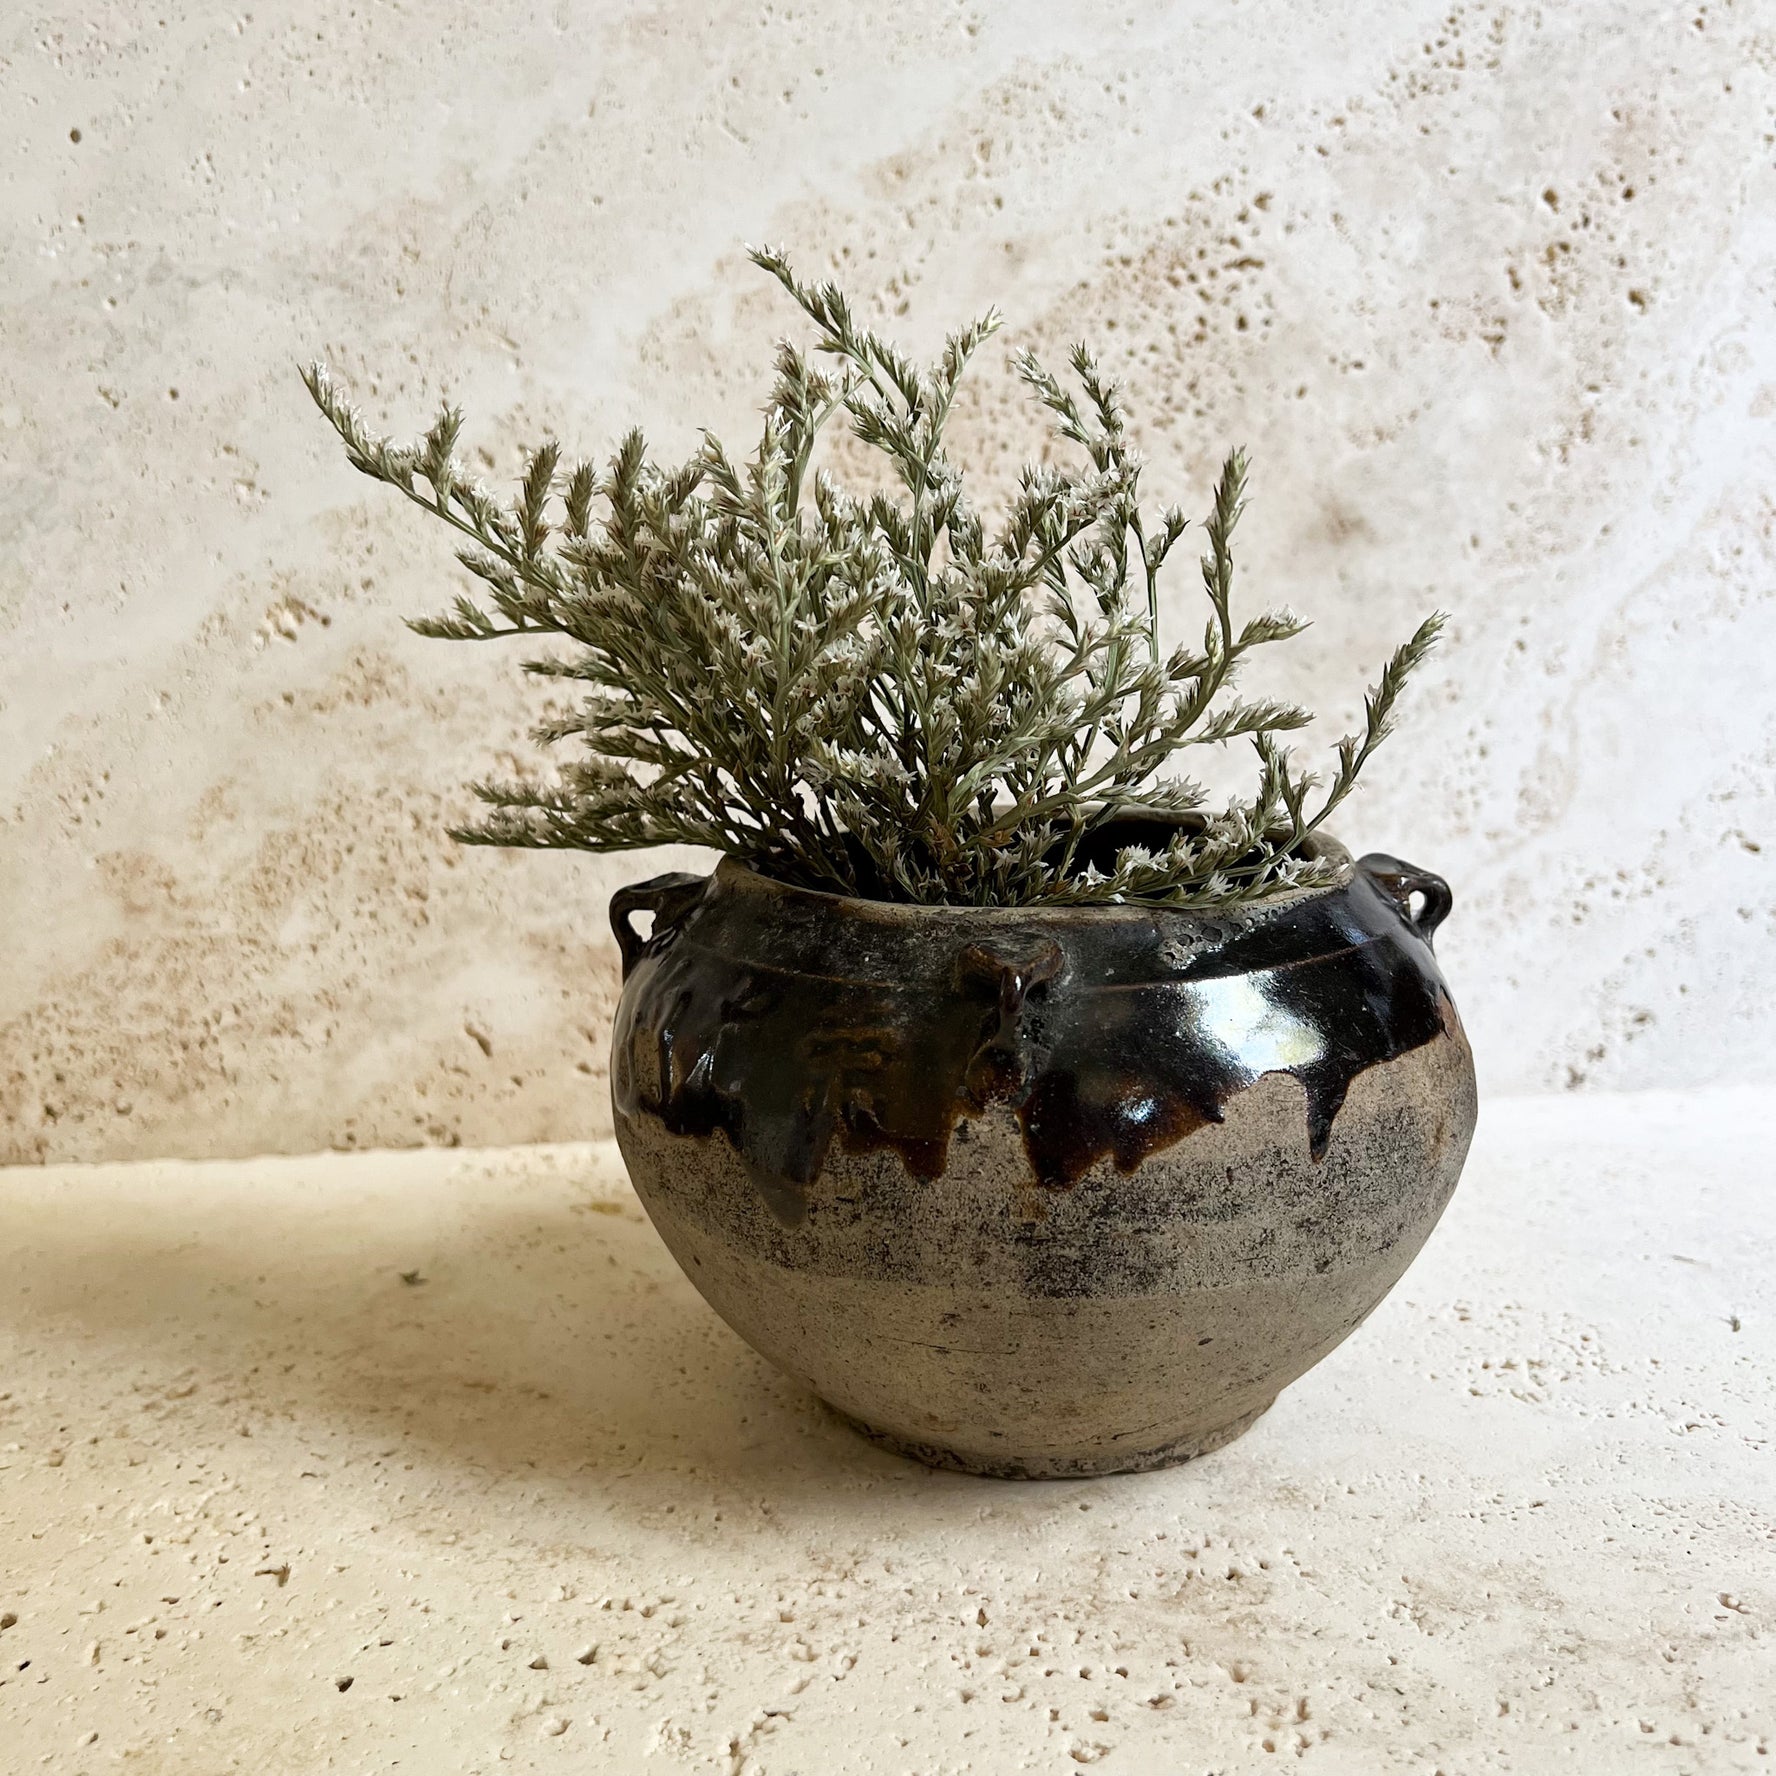 Antique brown Chinese pot filled with dried white German statice florals. The pot sits on a travertine stone.